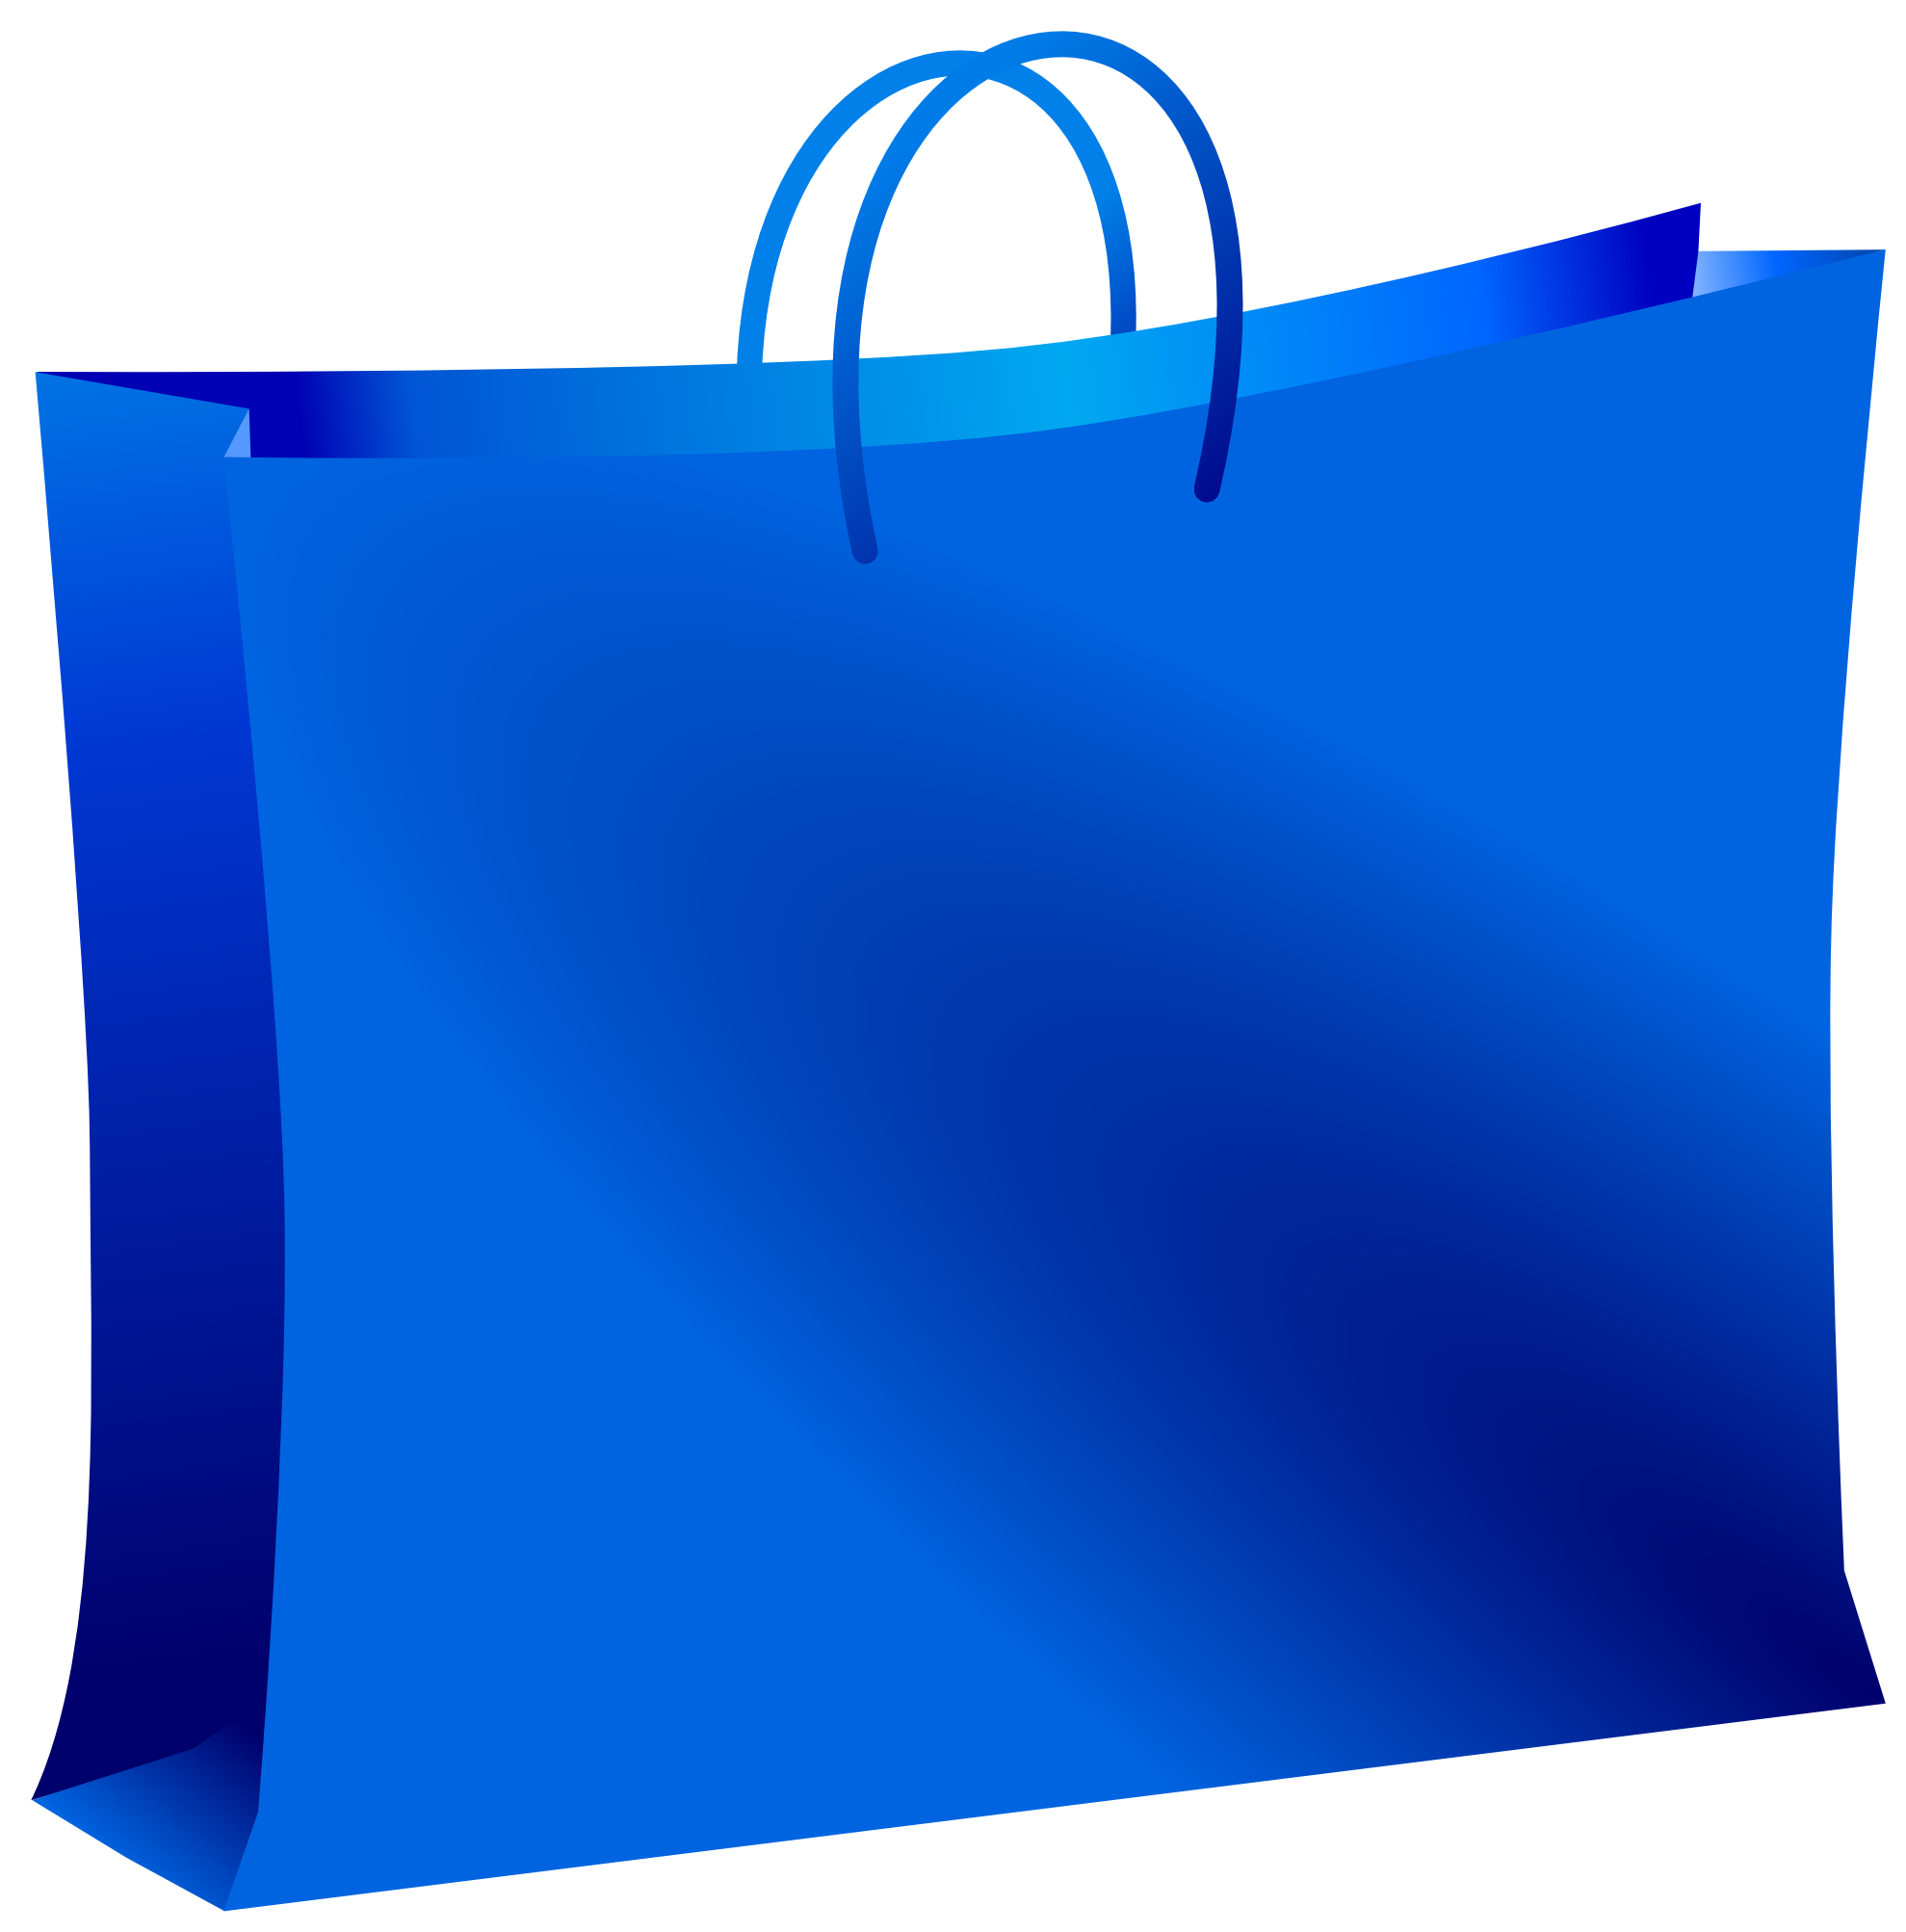 Plastic Shopping Bags Clipart Plastic Shopping Bags Clipart